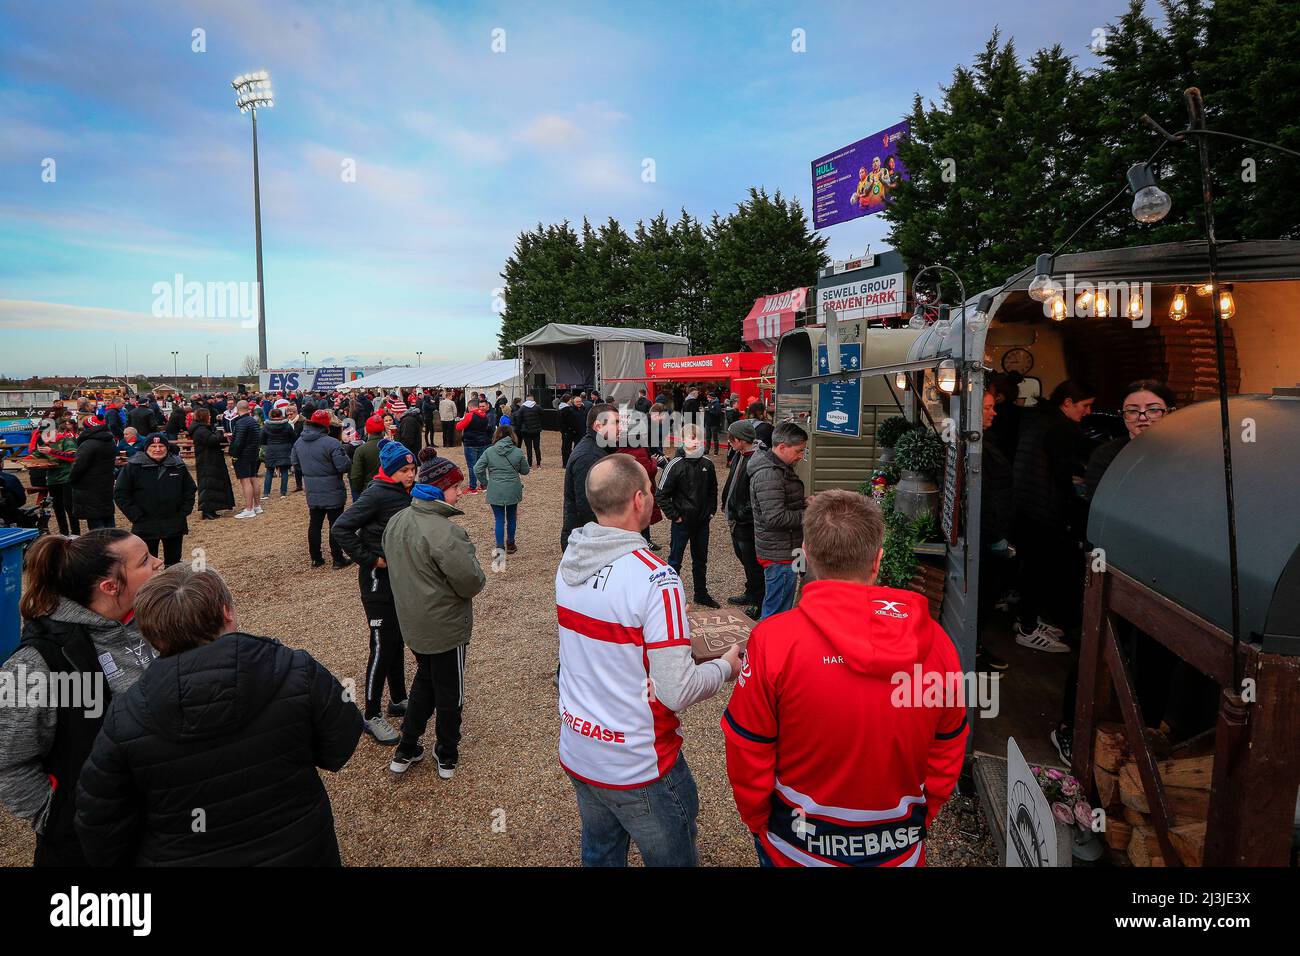 Music, food and entertainment is laid out in the new Pavilion area of The Sewell Group Craven Park Stadium ahead of the game Stock Photo